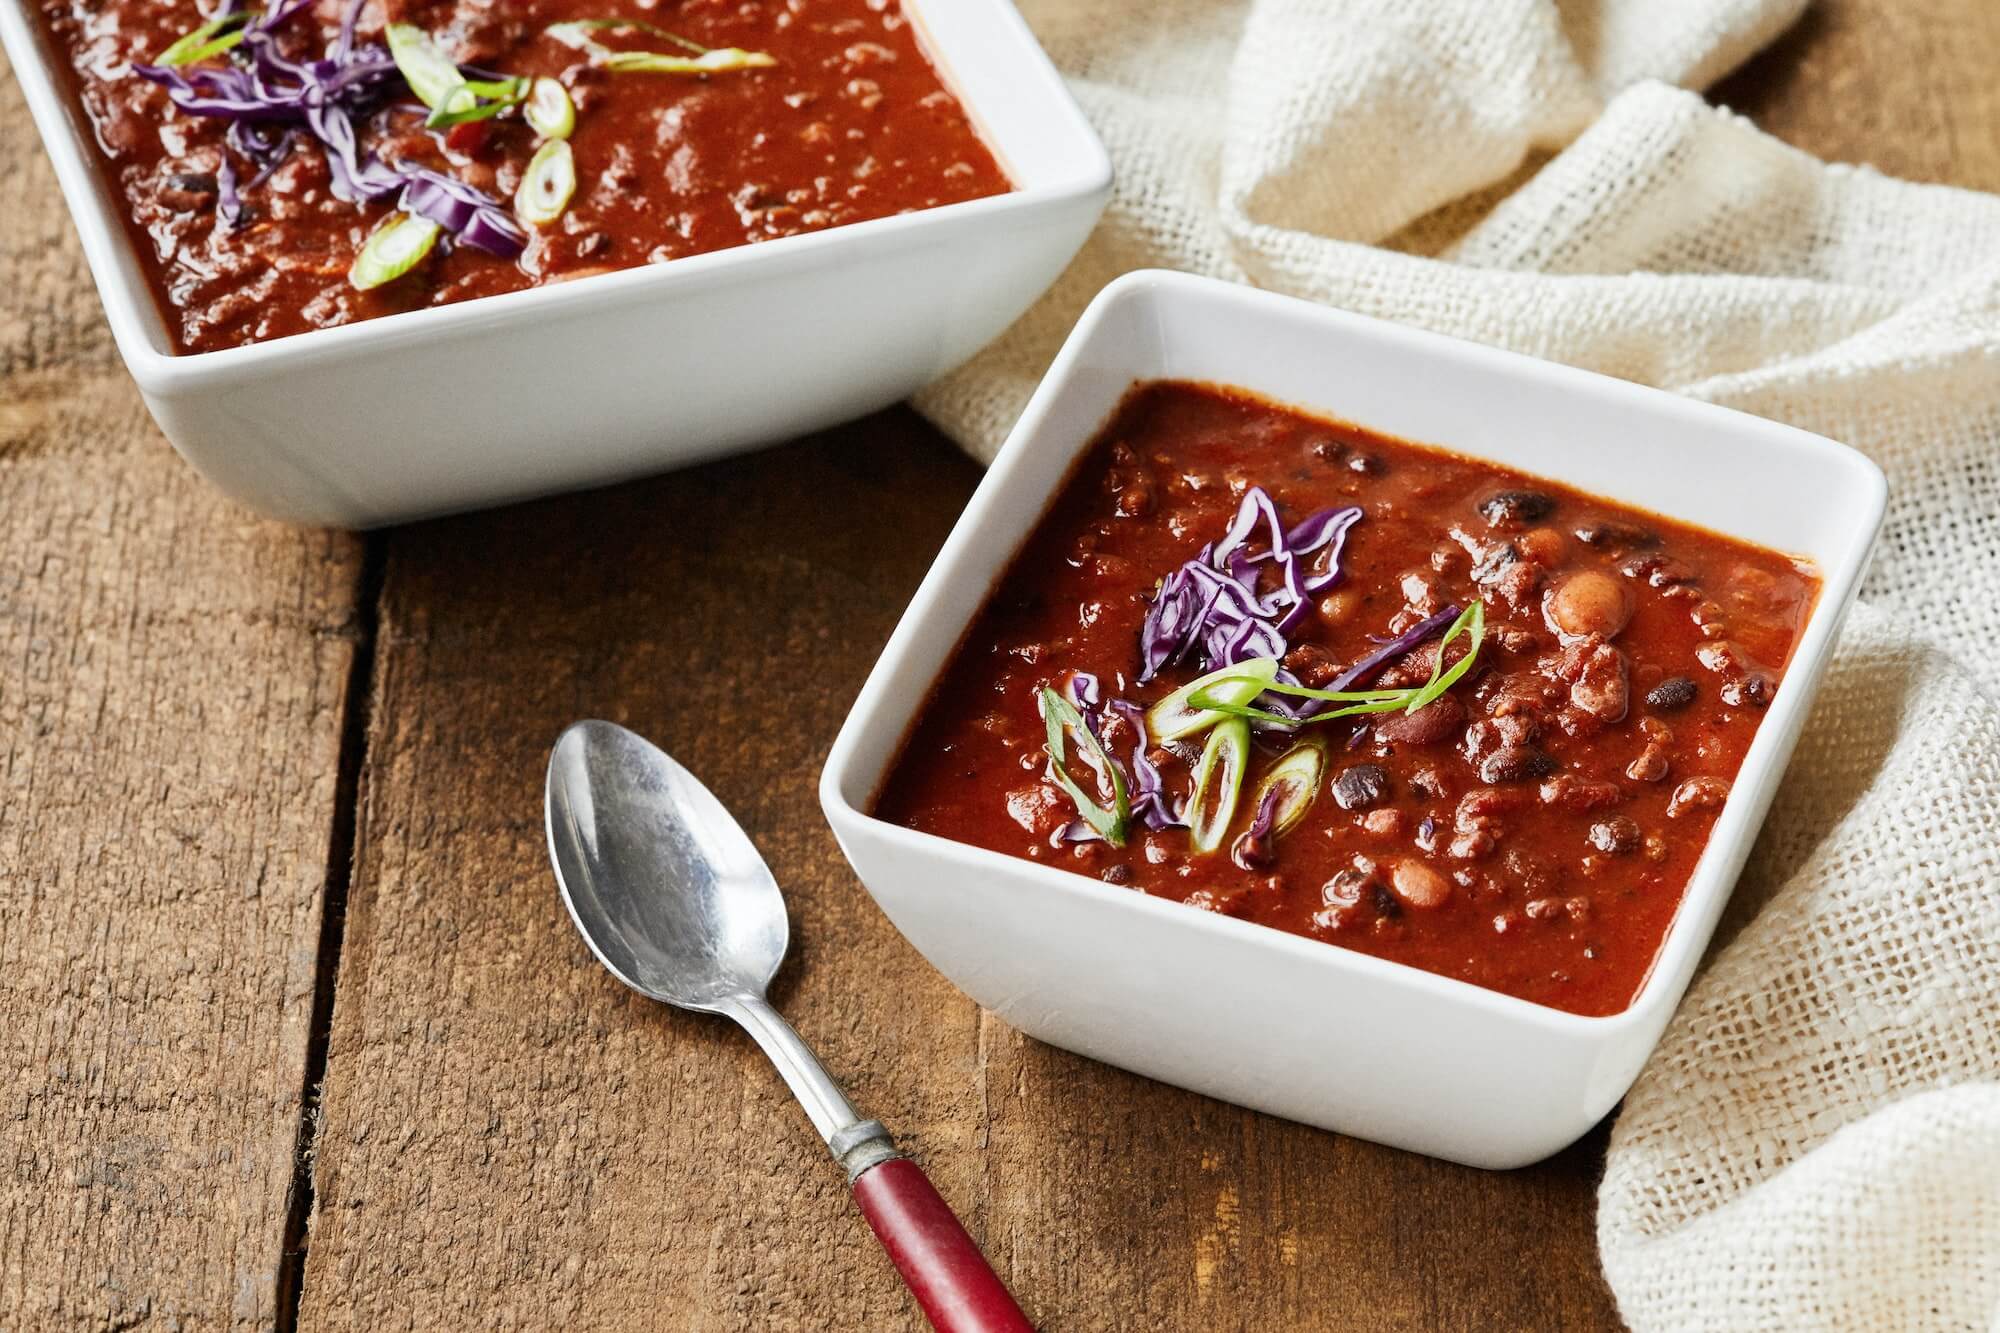 Bowls of Chili Soup with a spoon